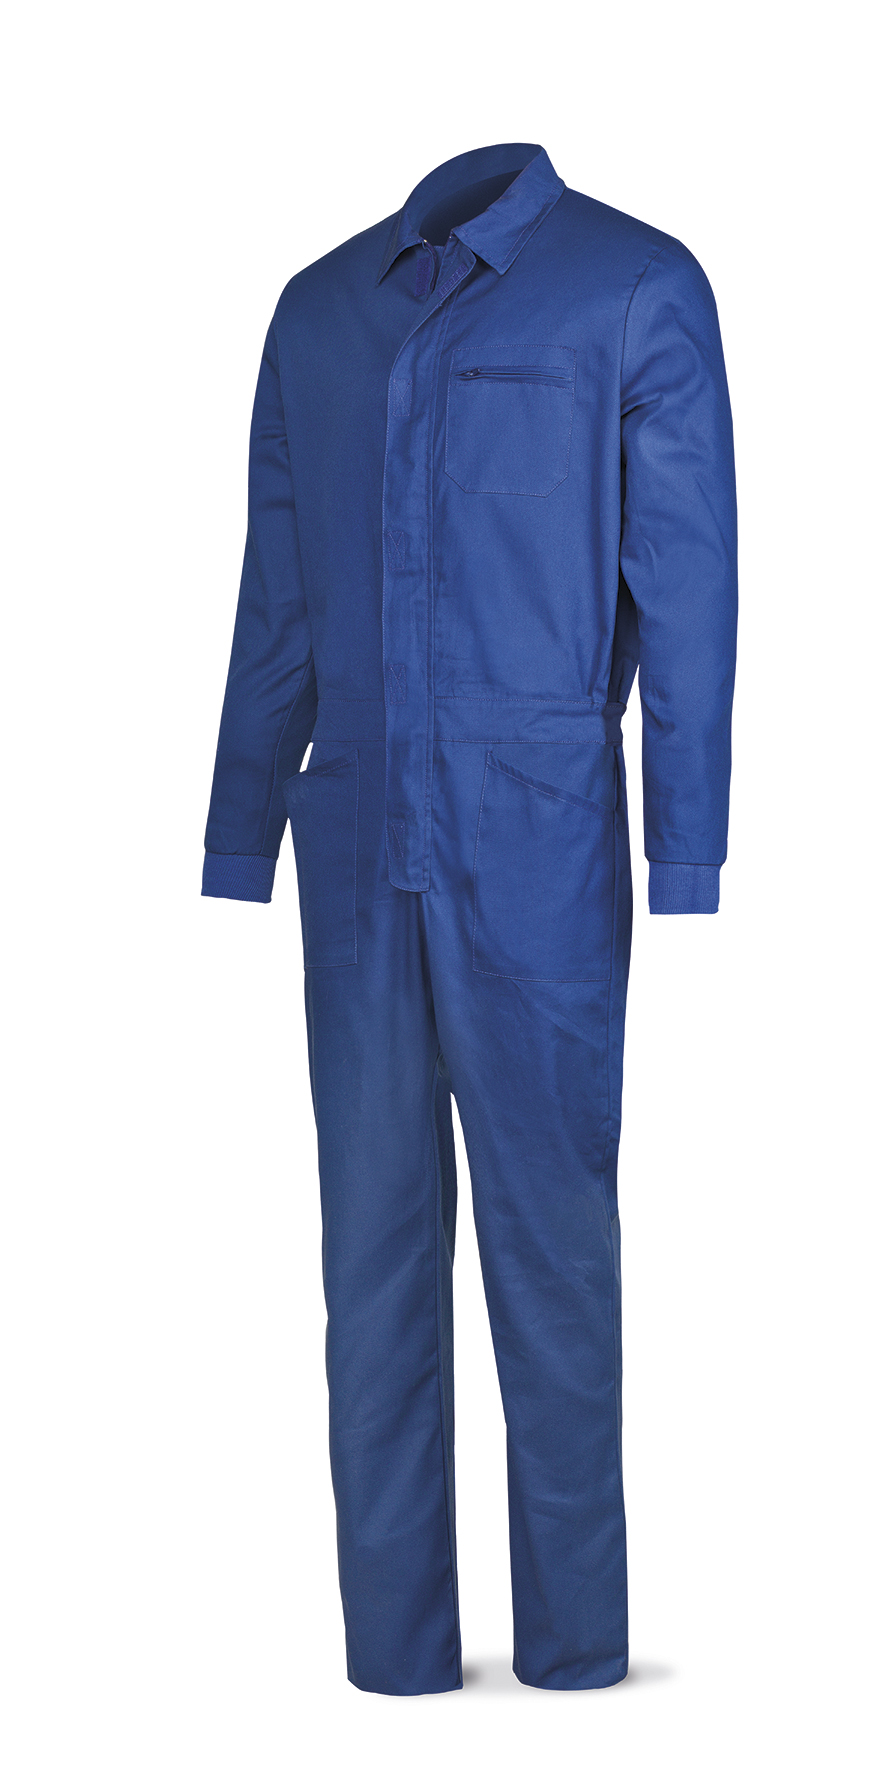 388-B Workwear Basic Line Royal blue cotton coverall 200 gr.